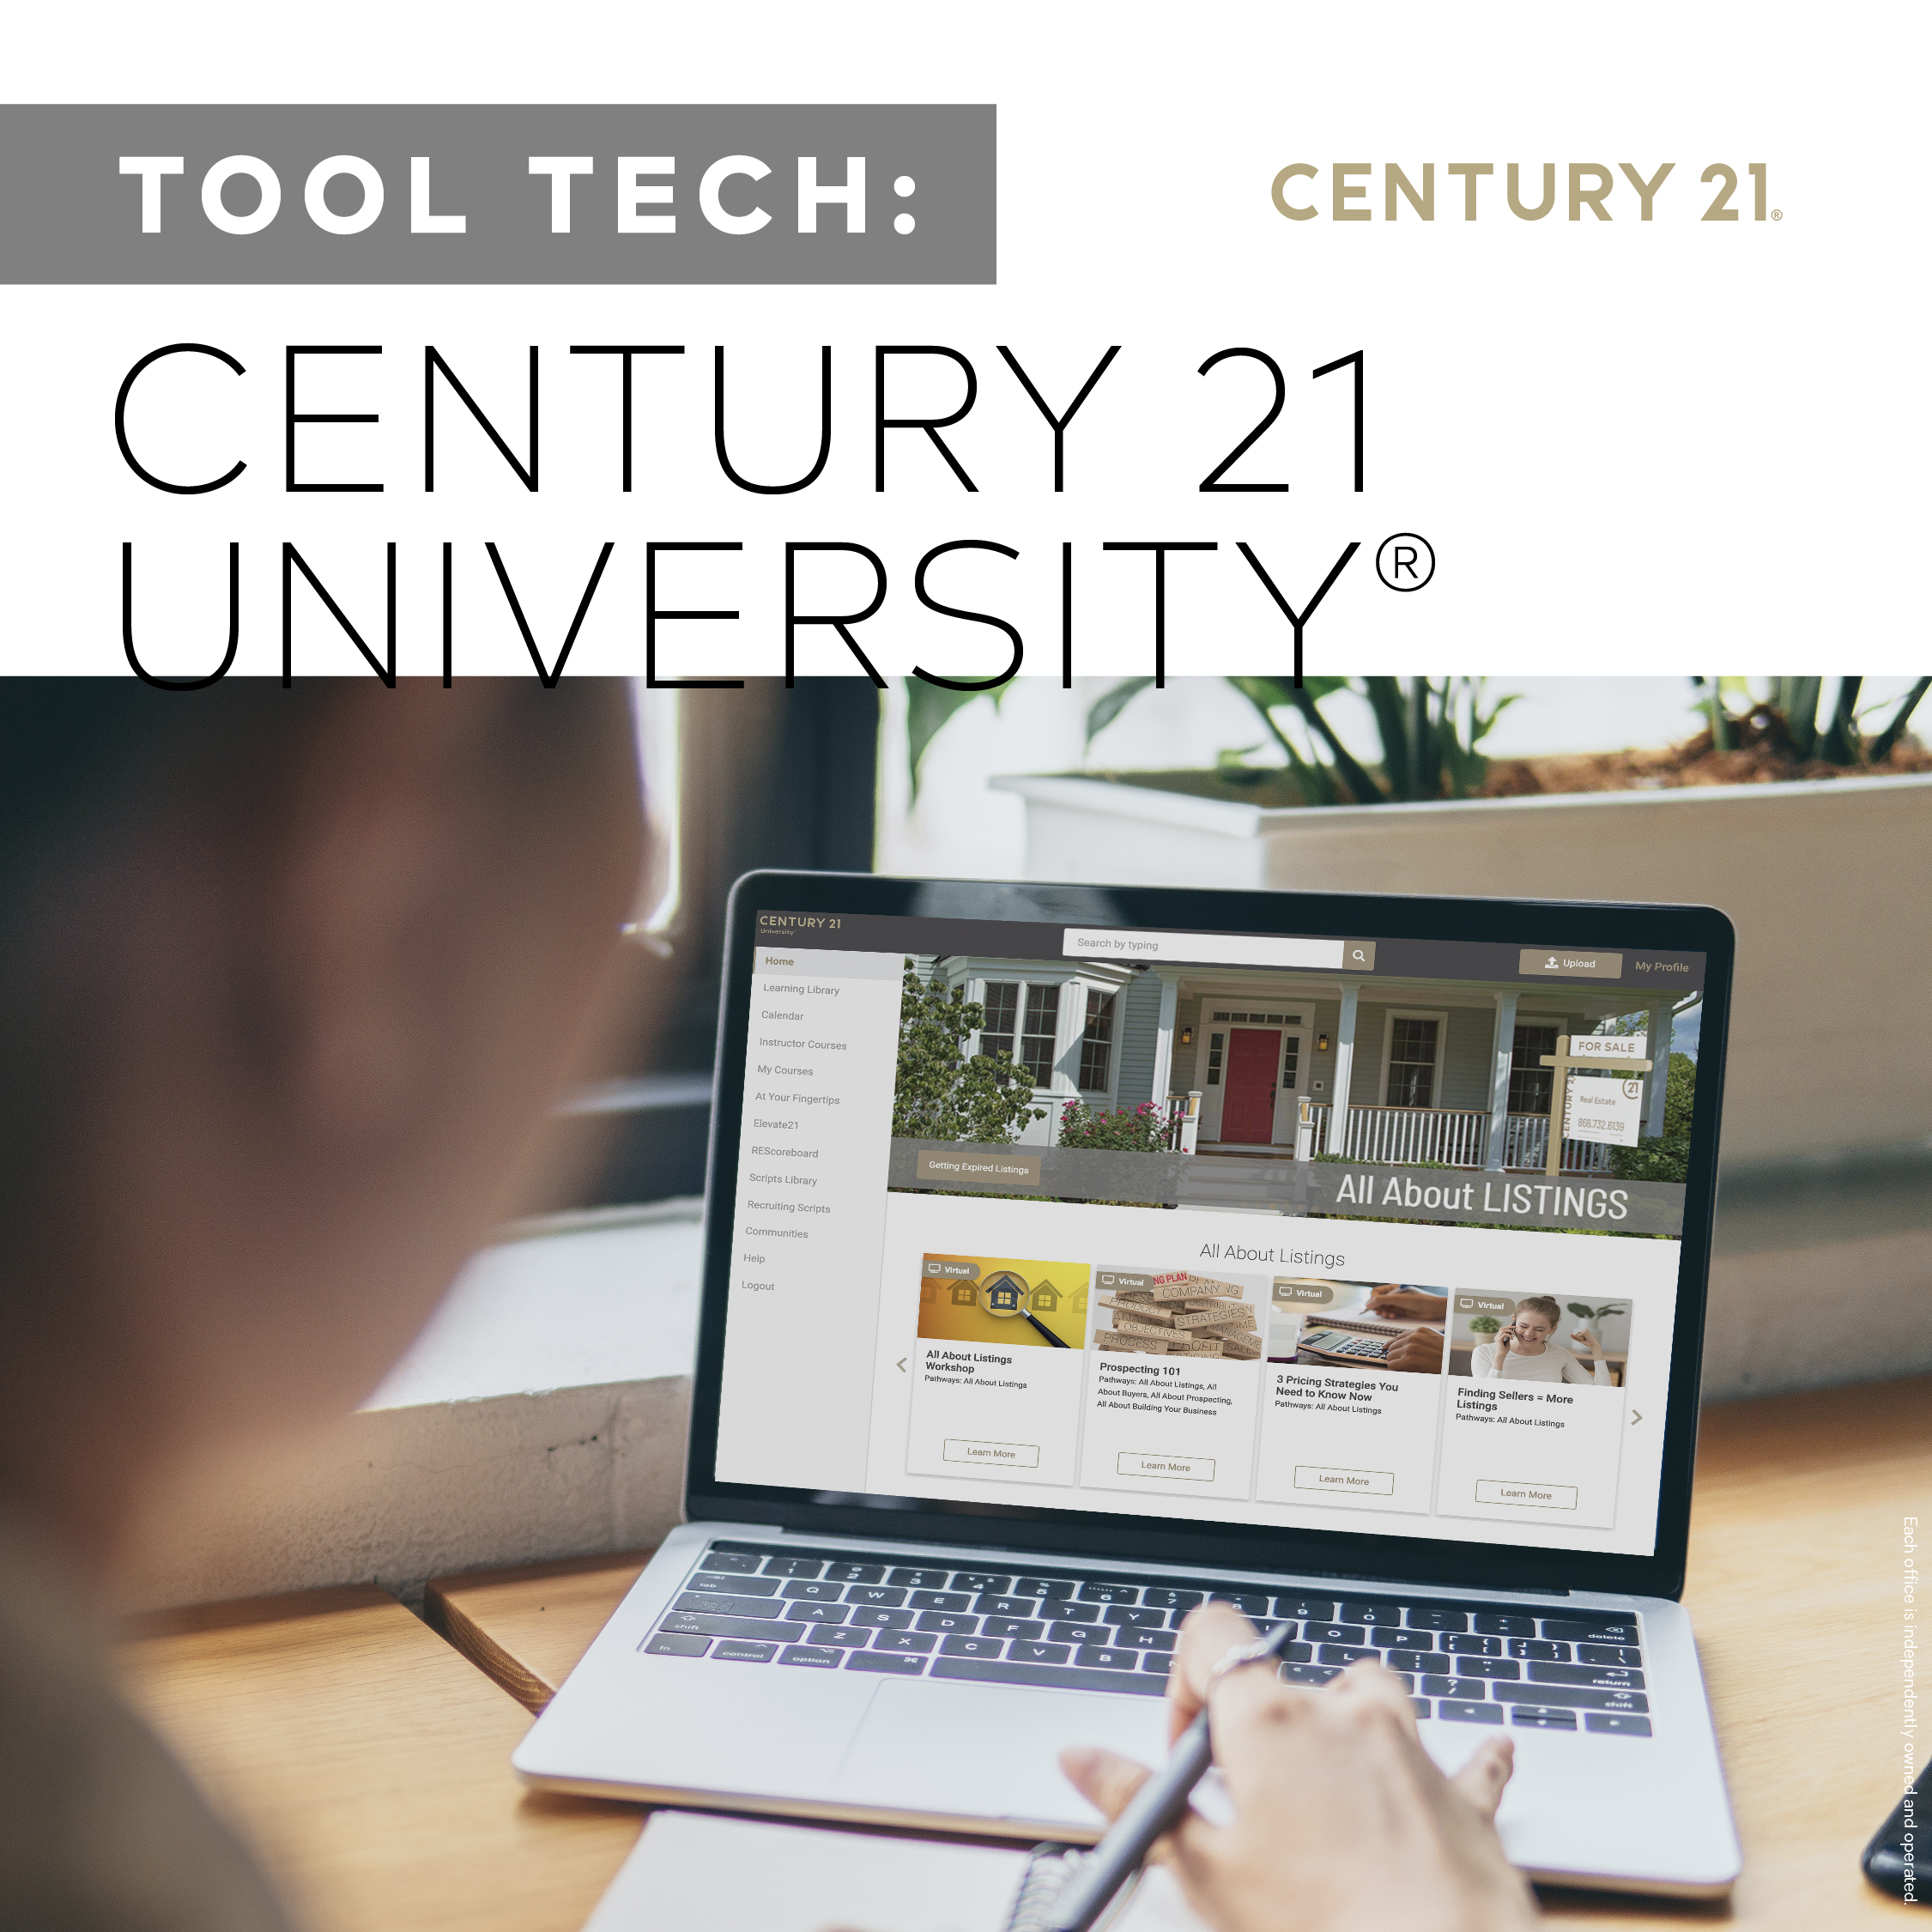 Connecting with CENTURY 21!